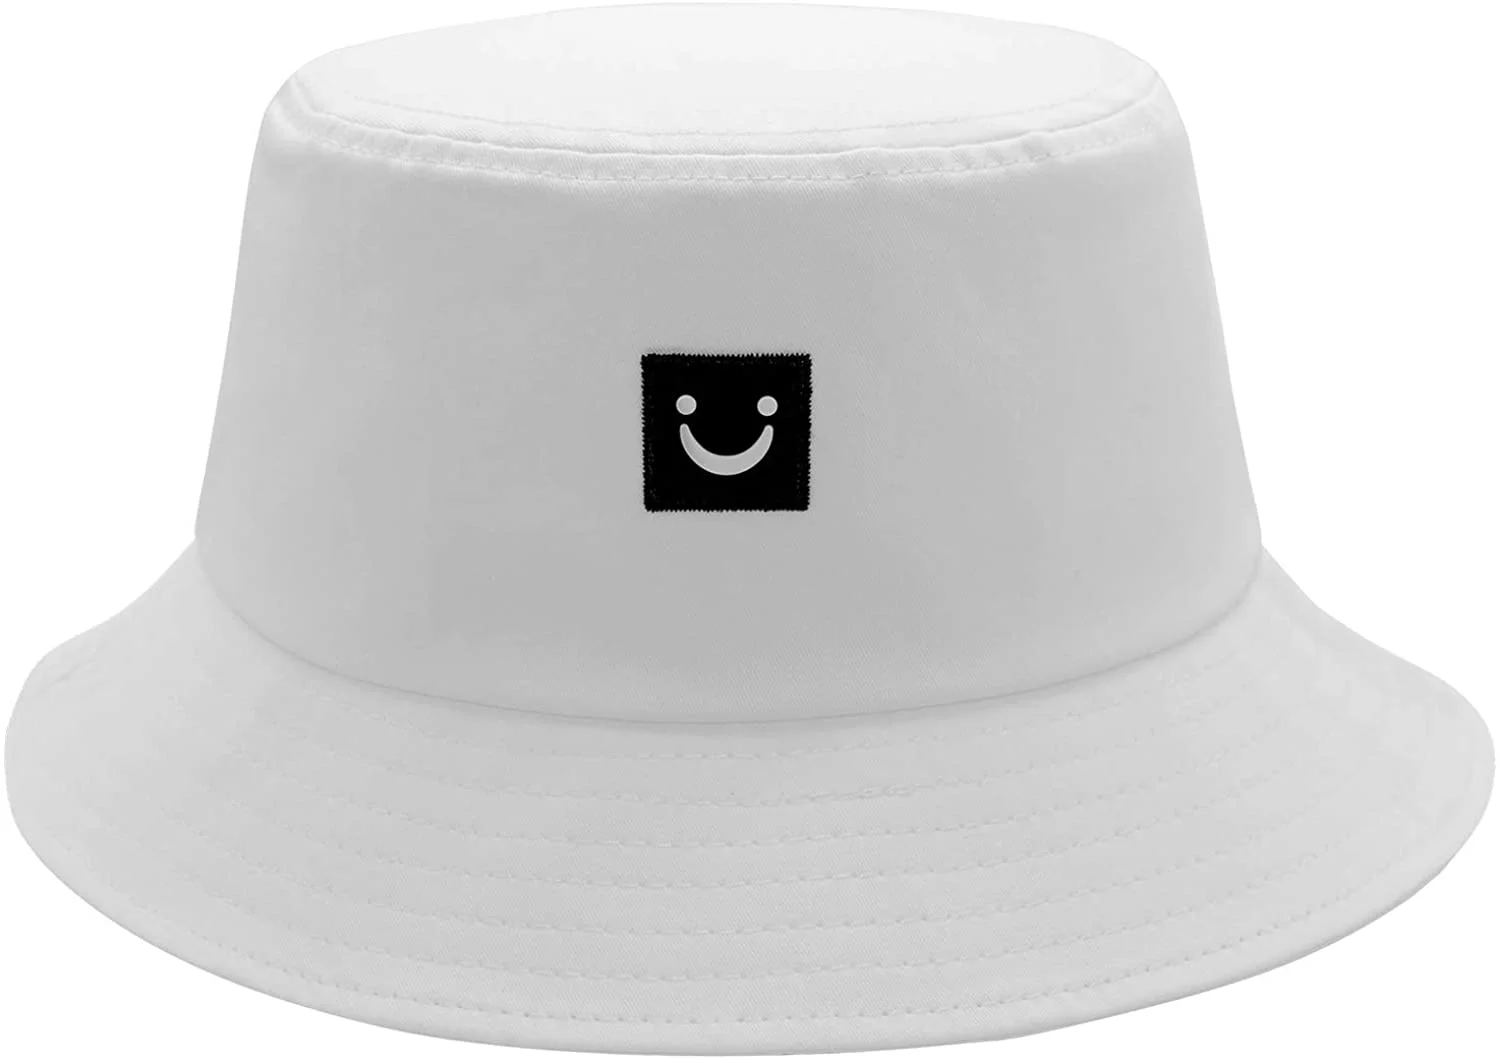 HSYZZY + Smiley Face Bucket Hat